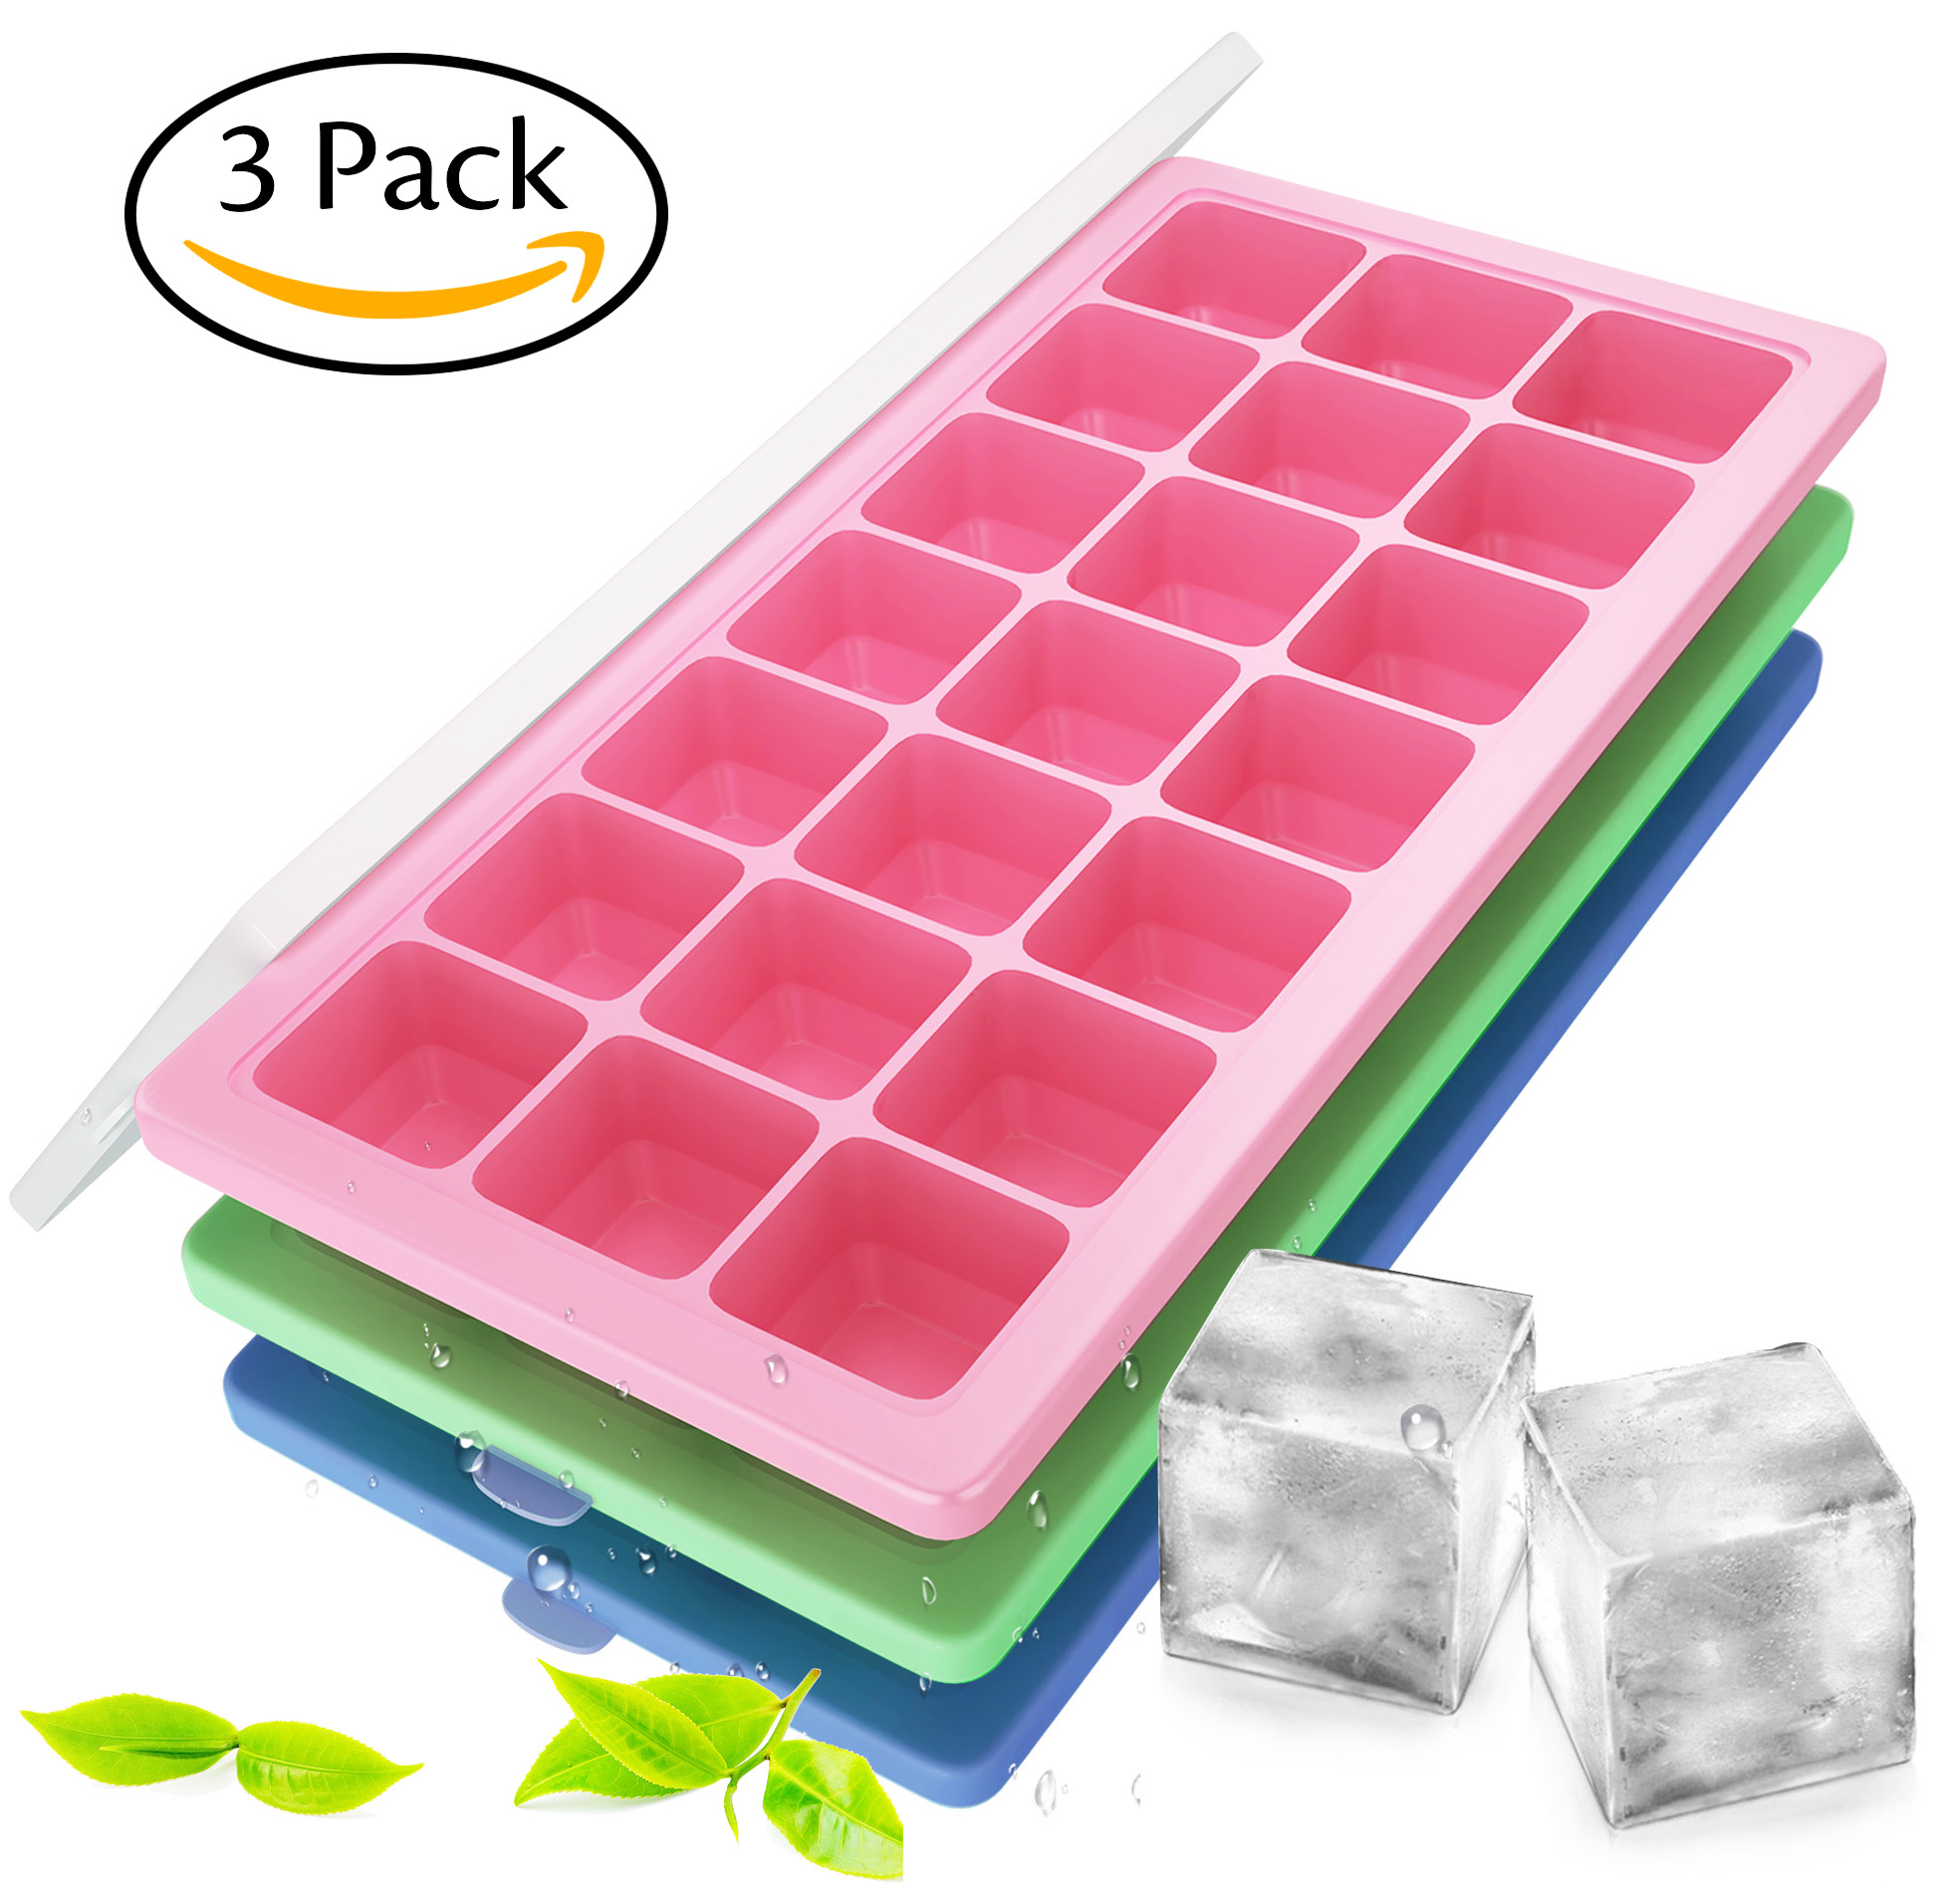 Korlon 3 Pack Silicone Ice Cube Trays with Lid - Easy Release Ice